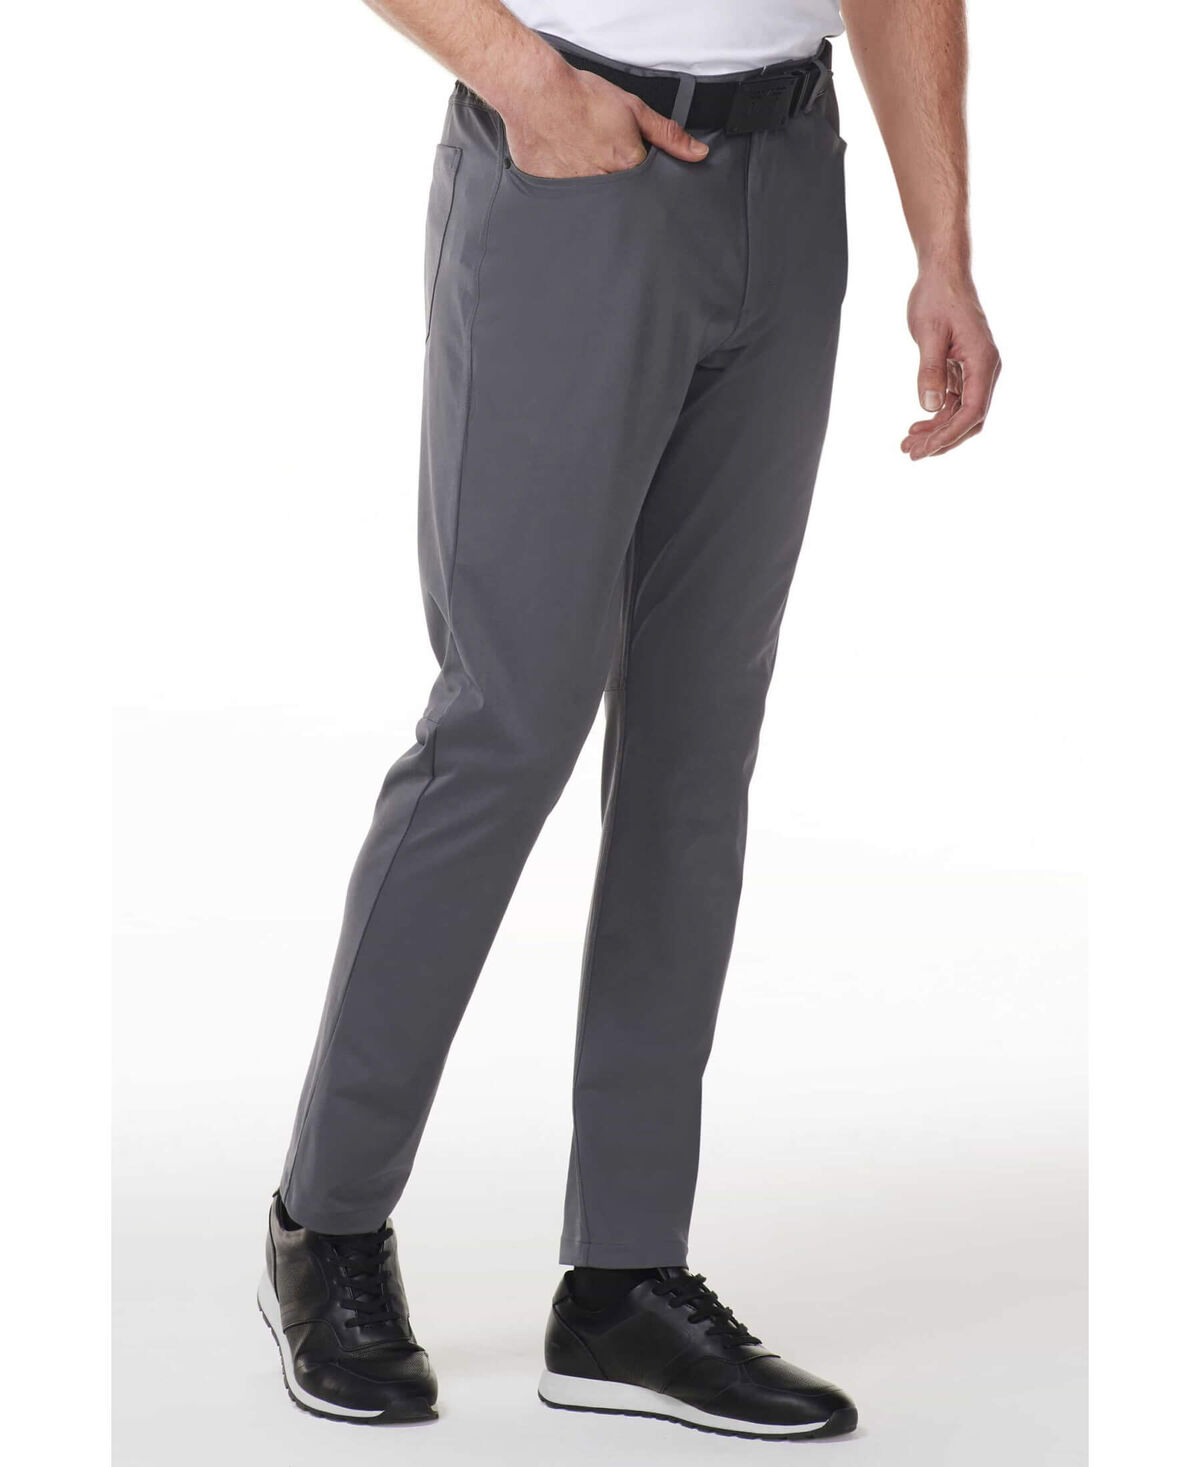 Slim Trouser Pants  Shop the Highest Quality Golf Apparel, Gear,  Accessories and Golf Clubs at PXG